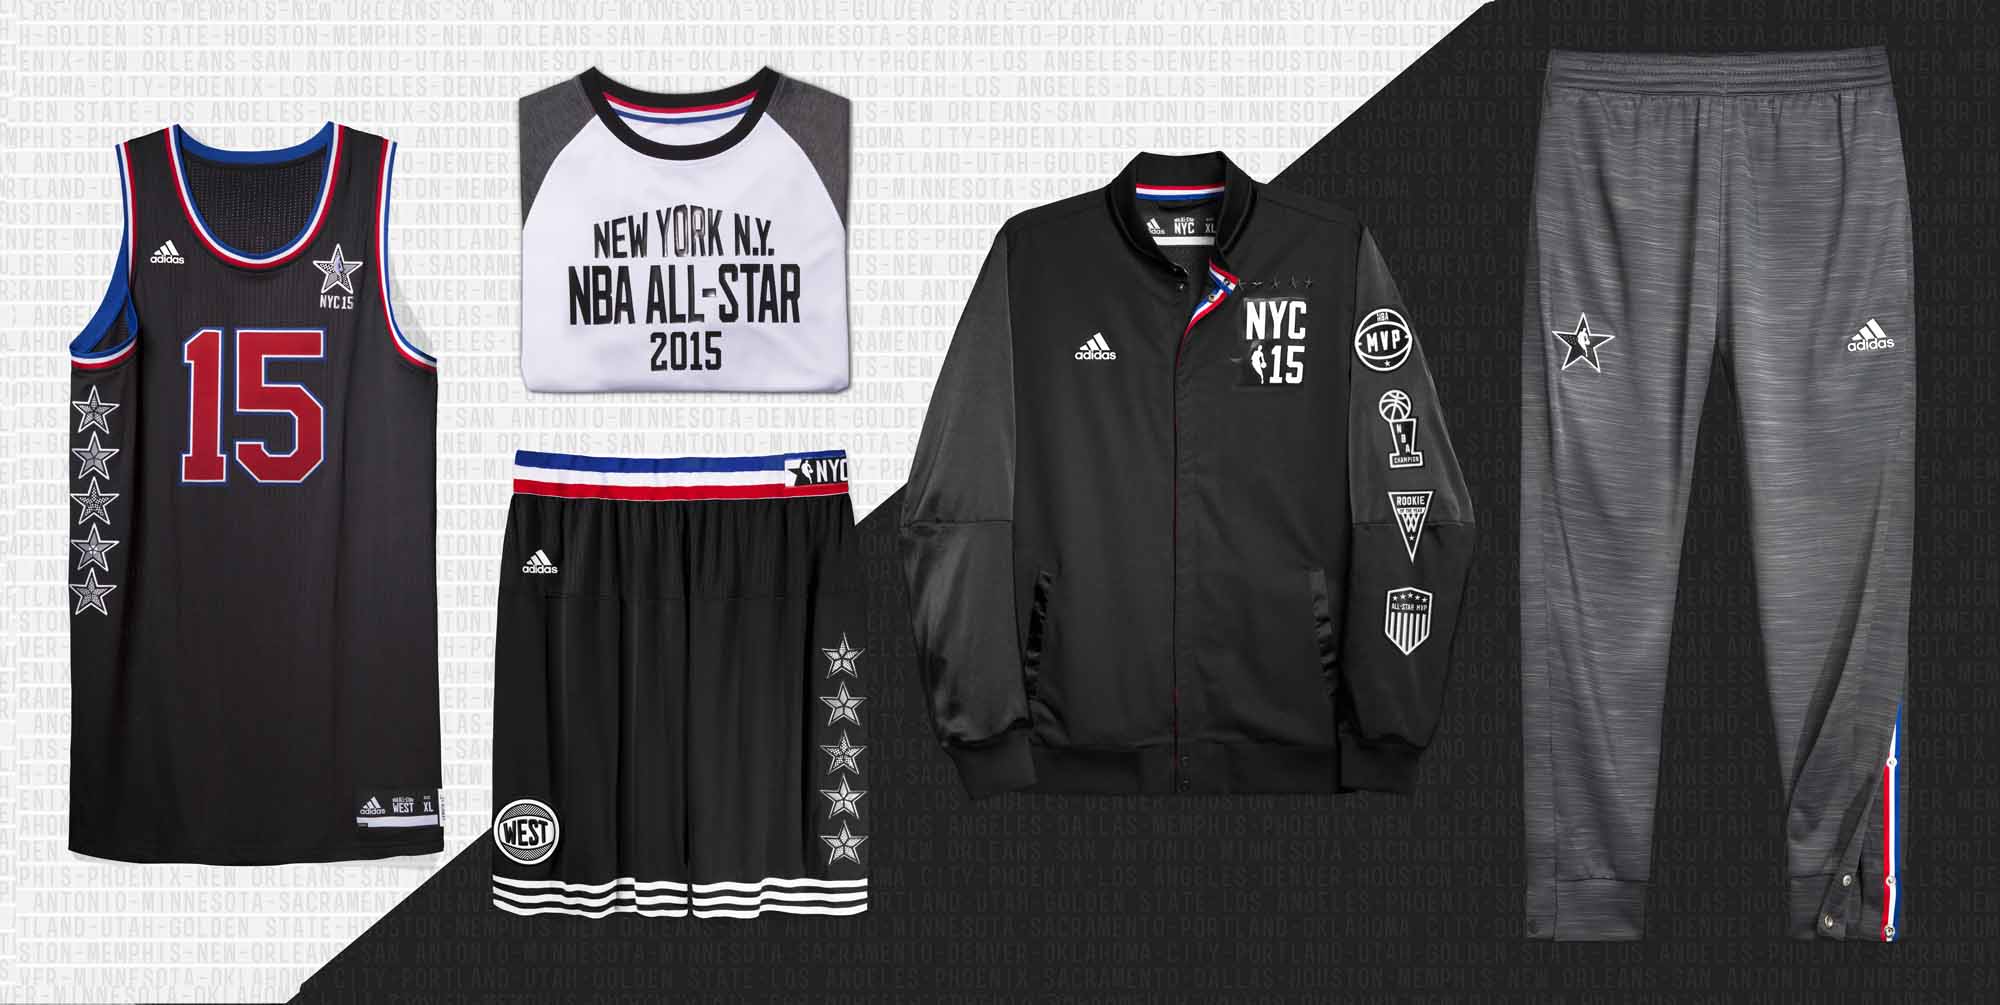 2015 NBA All-Star Uniforms by adidas - Detailed Look + Release